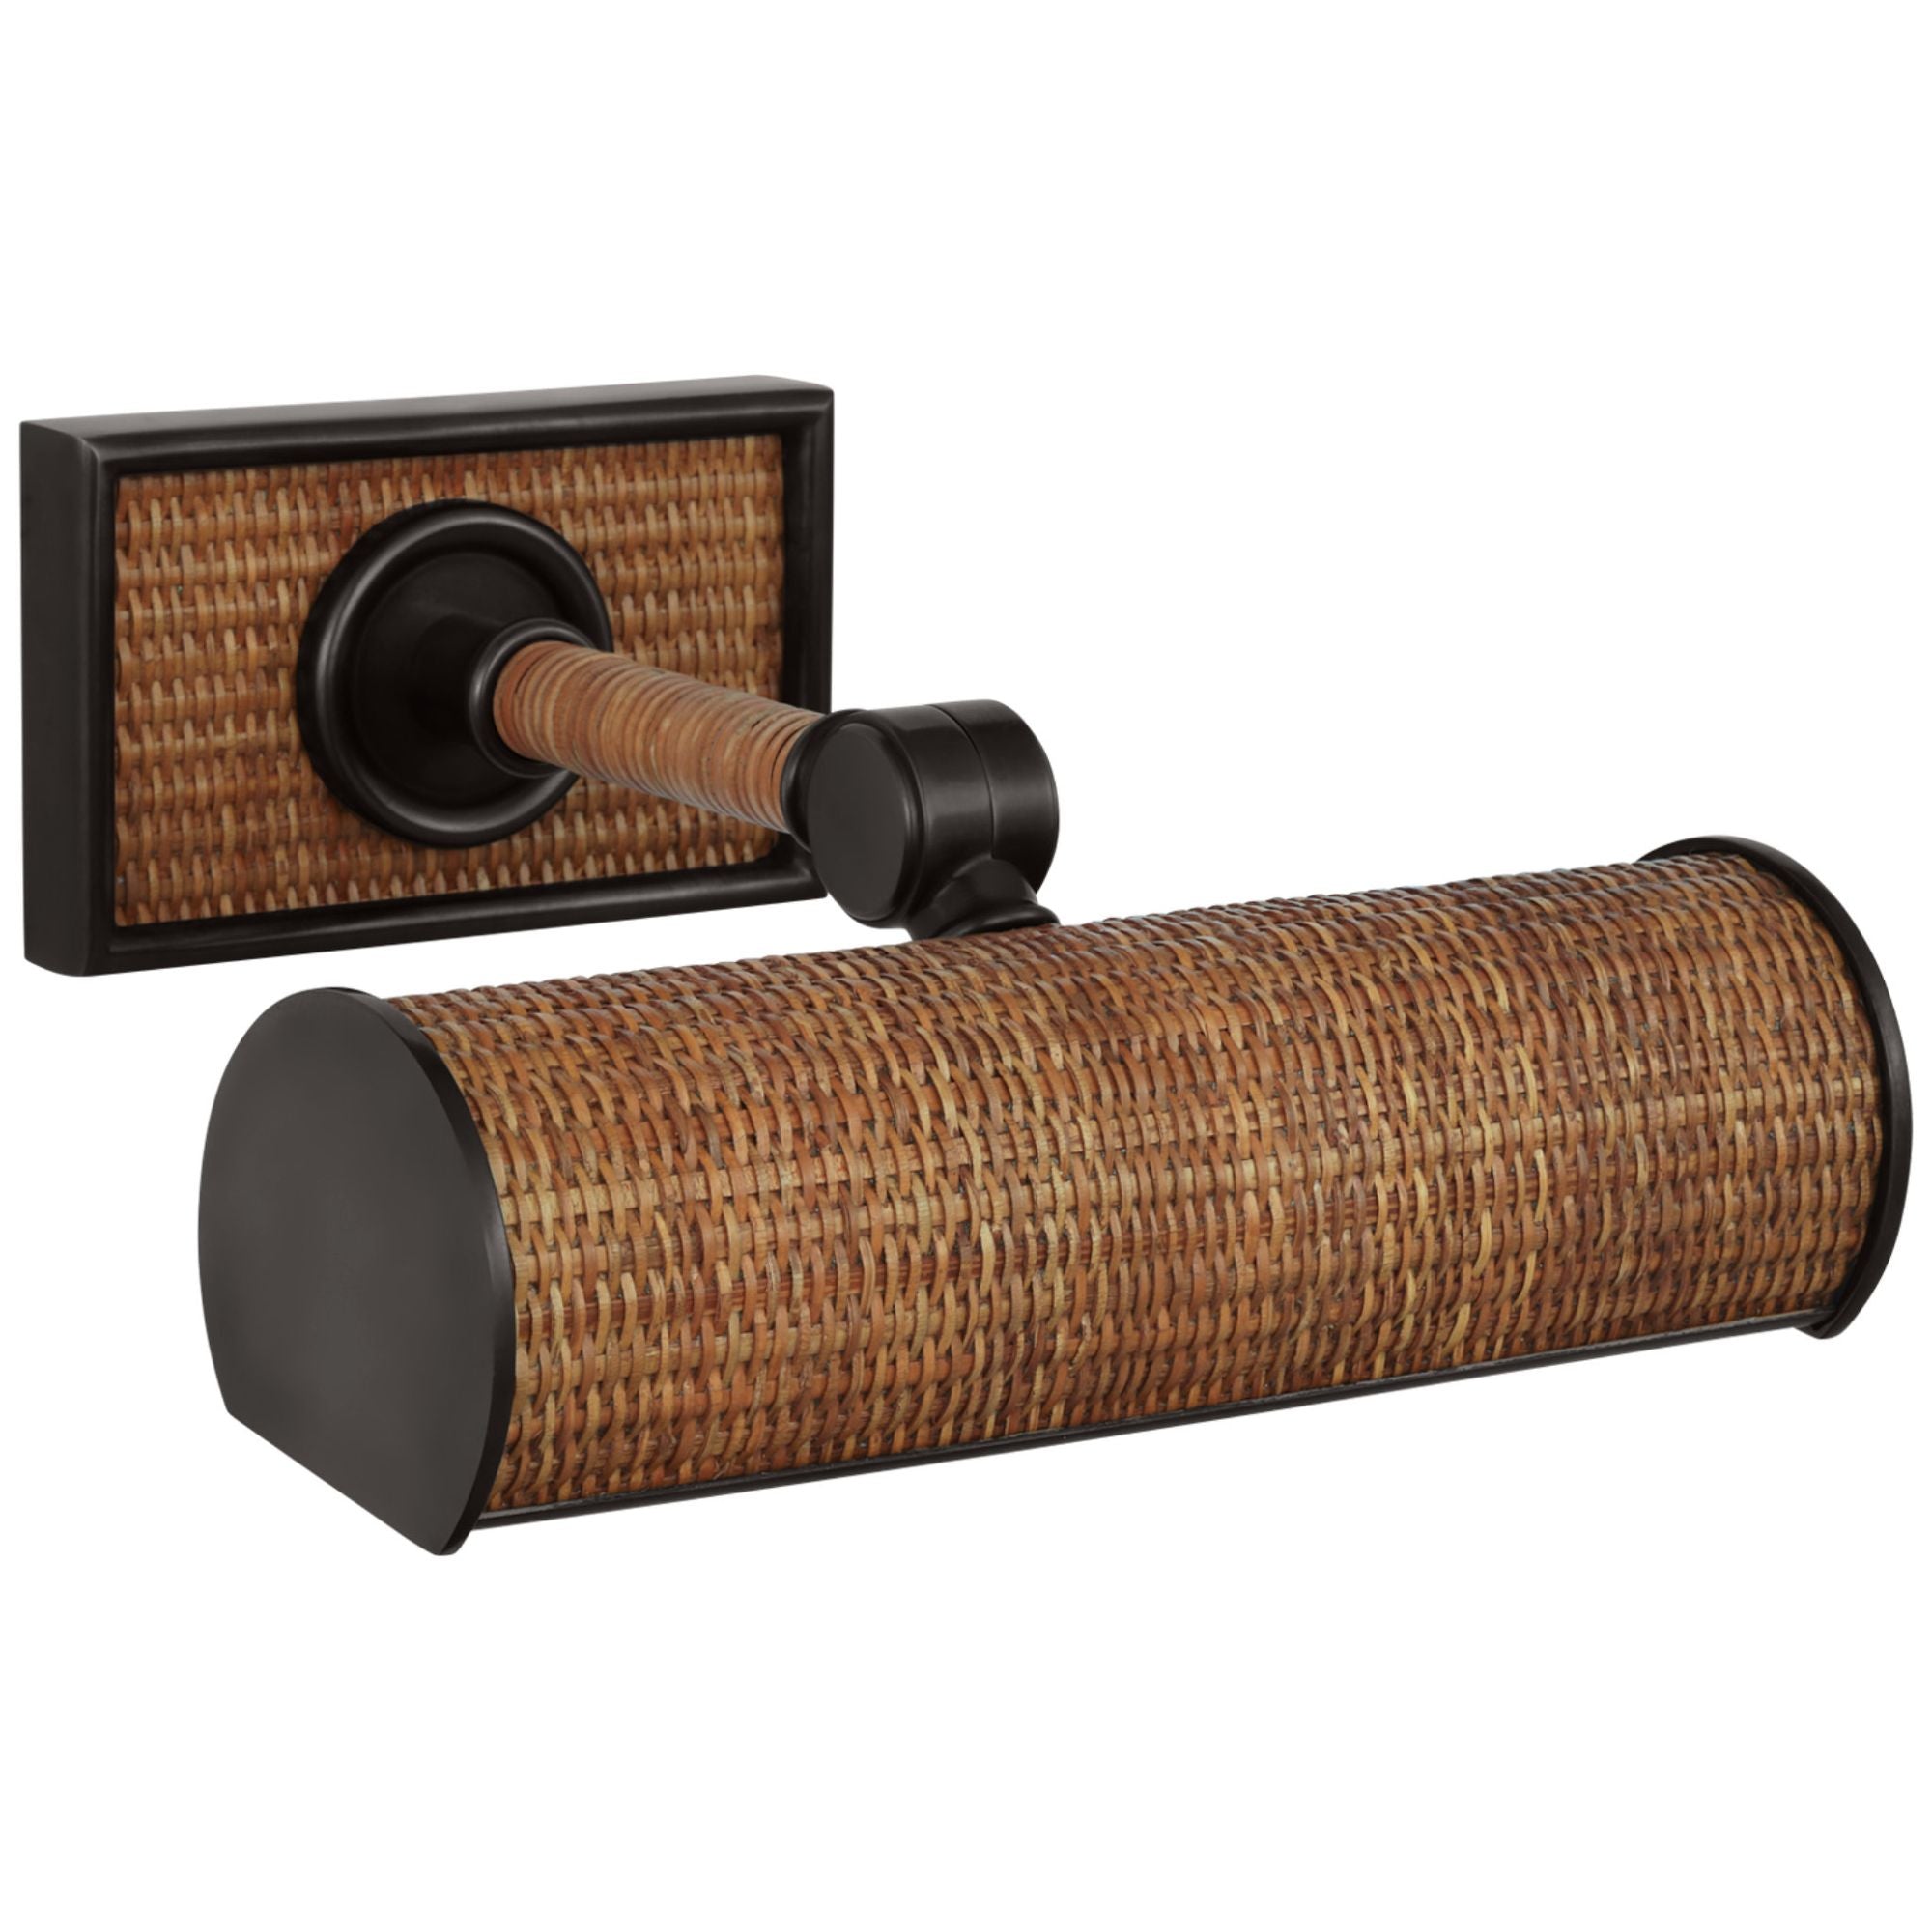 Chapman & Myers Halwell 8" Picture Light in Bronze and Natural Woven Rattan